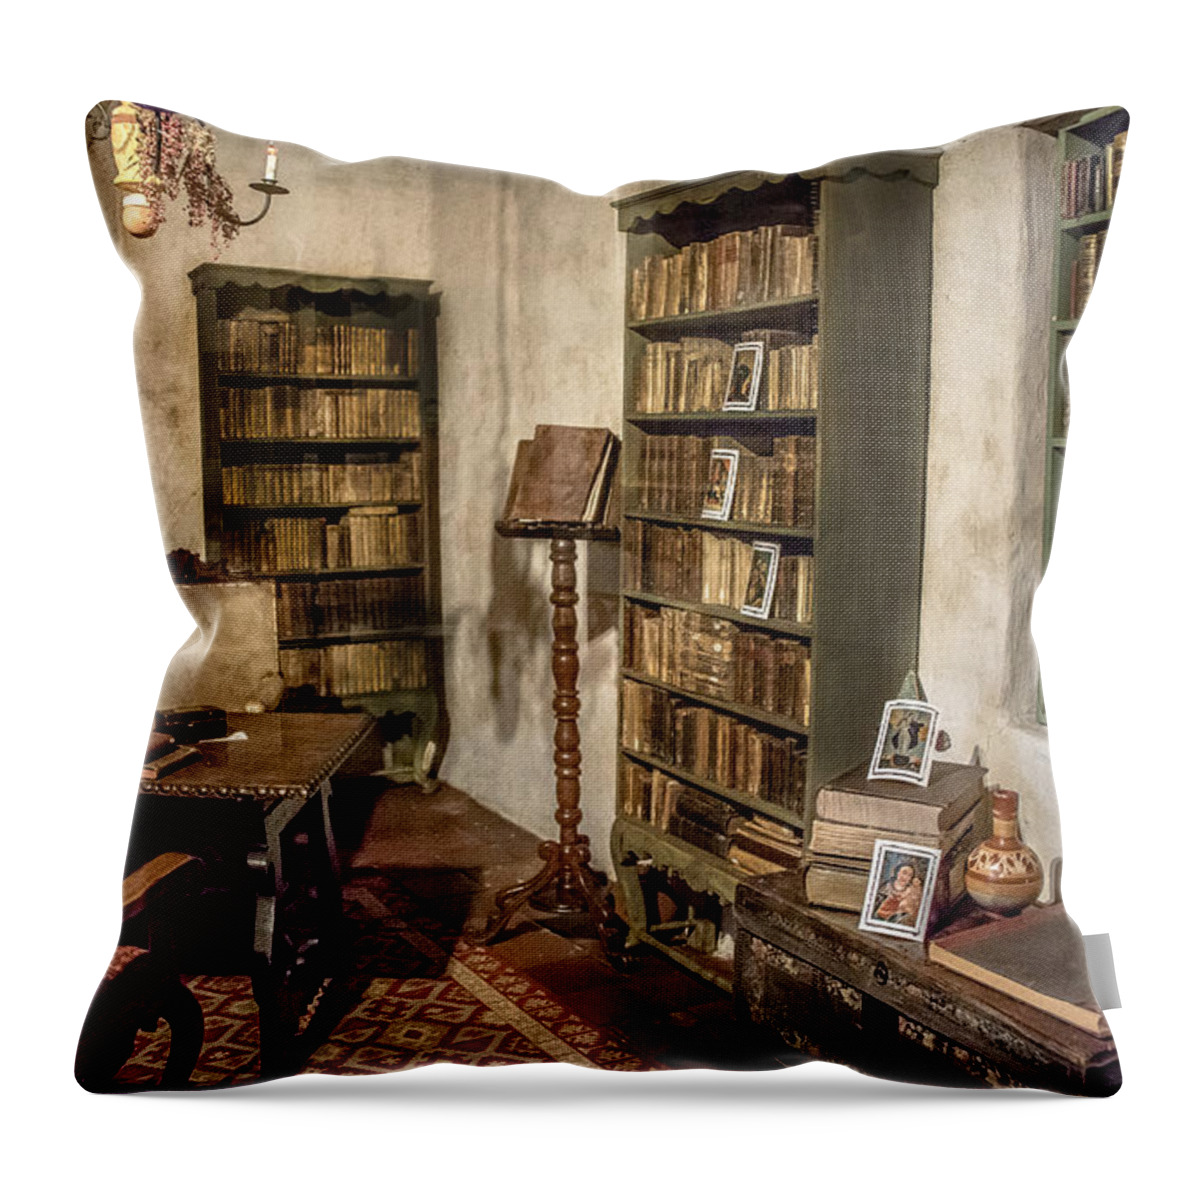 California Throw Pillow featuring the photograph First Library by Patrick Boening